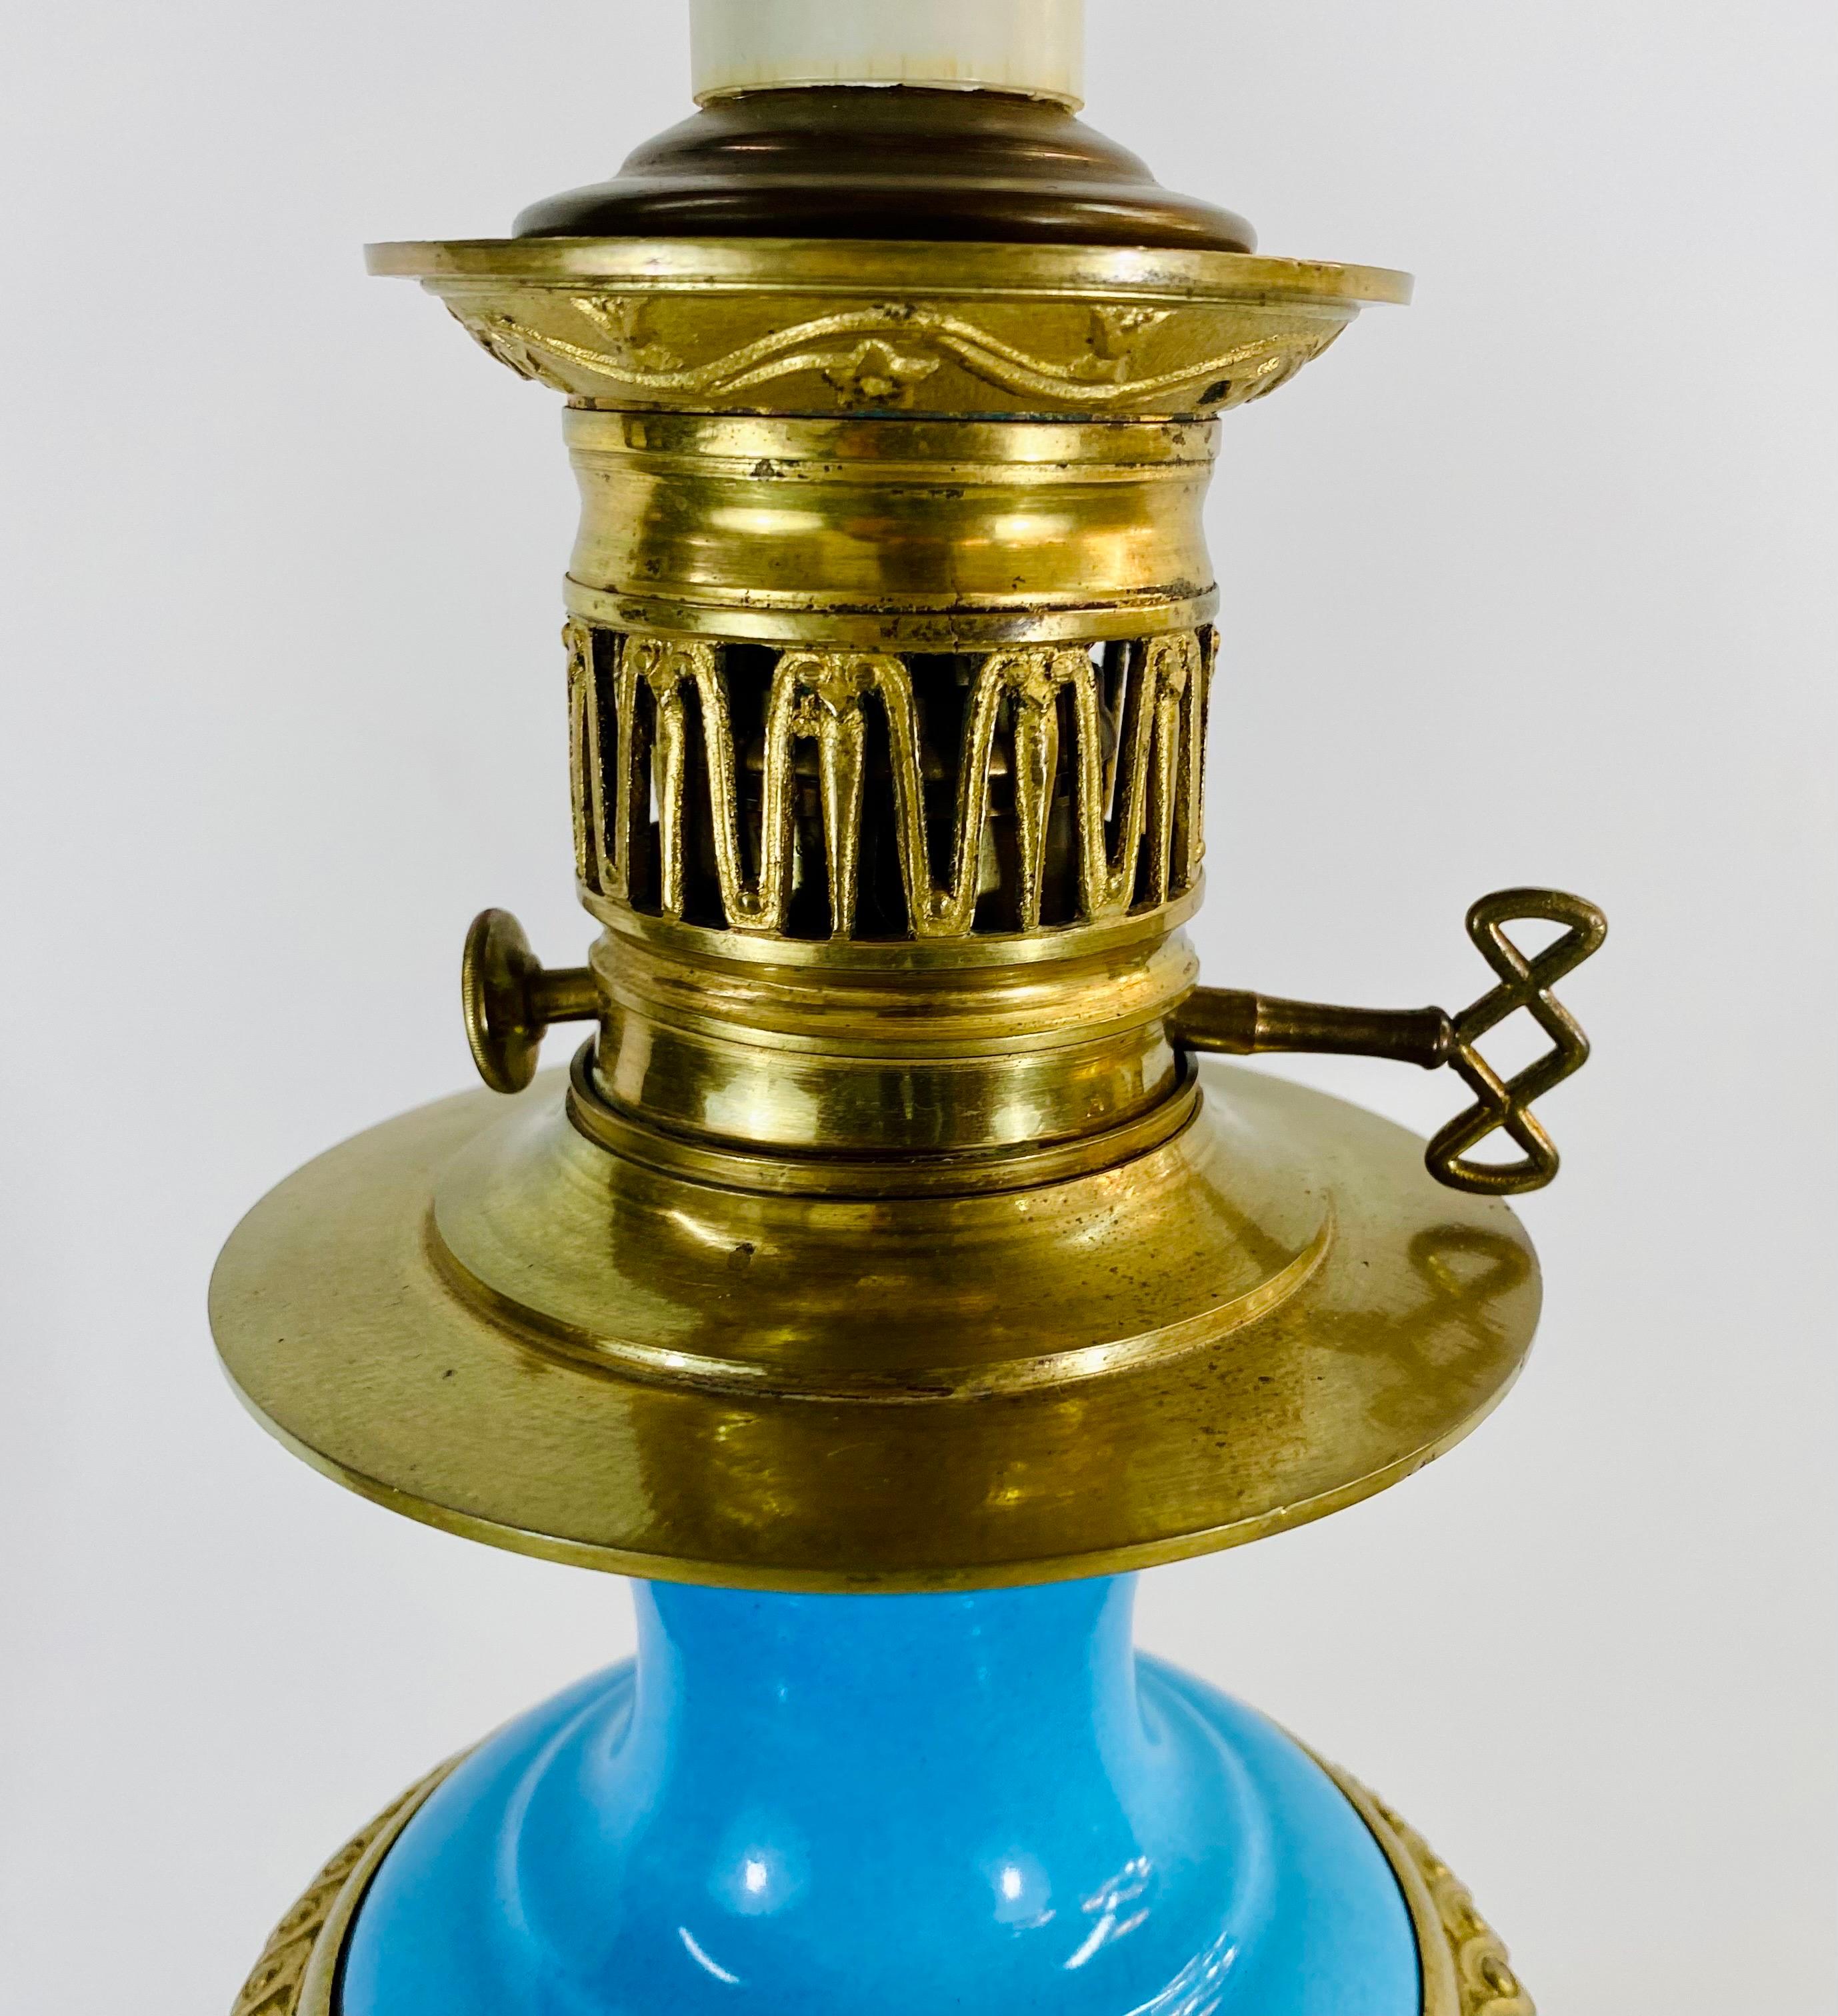 20th Century French Neoclassical Style Porcelain & Brass Converted Oil Lamp, a Pair  For Sale